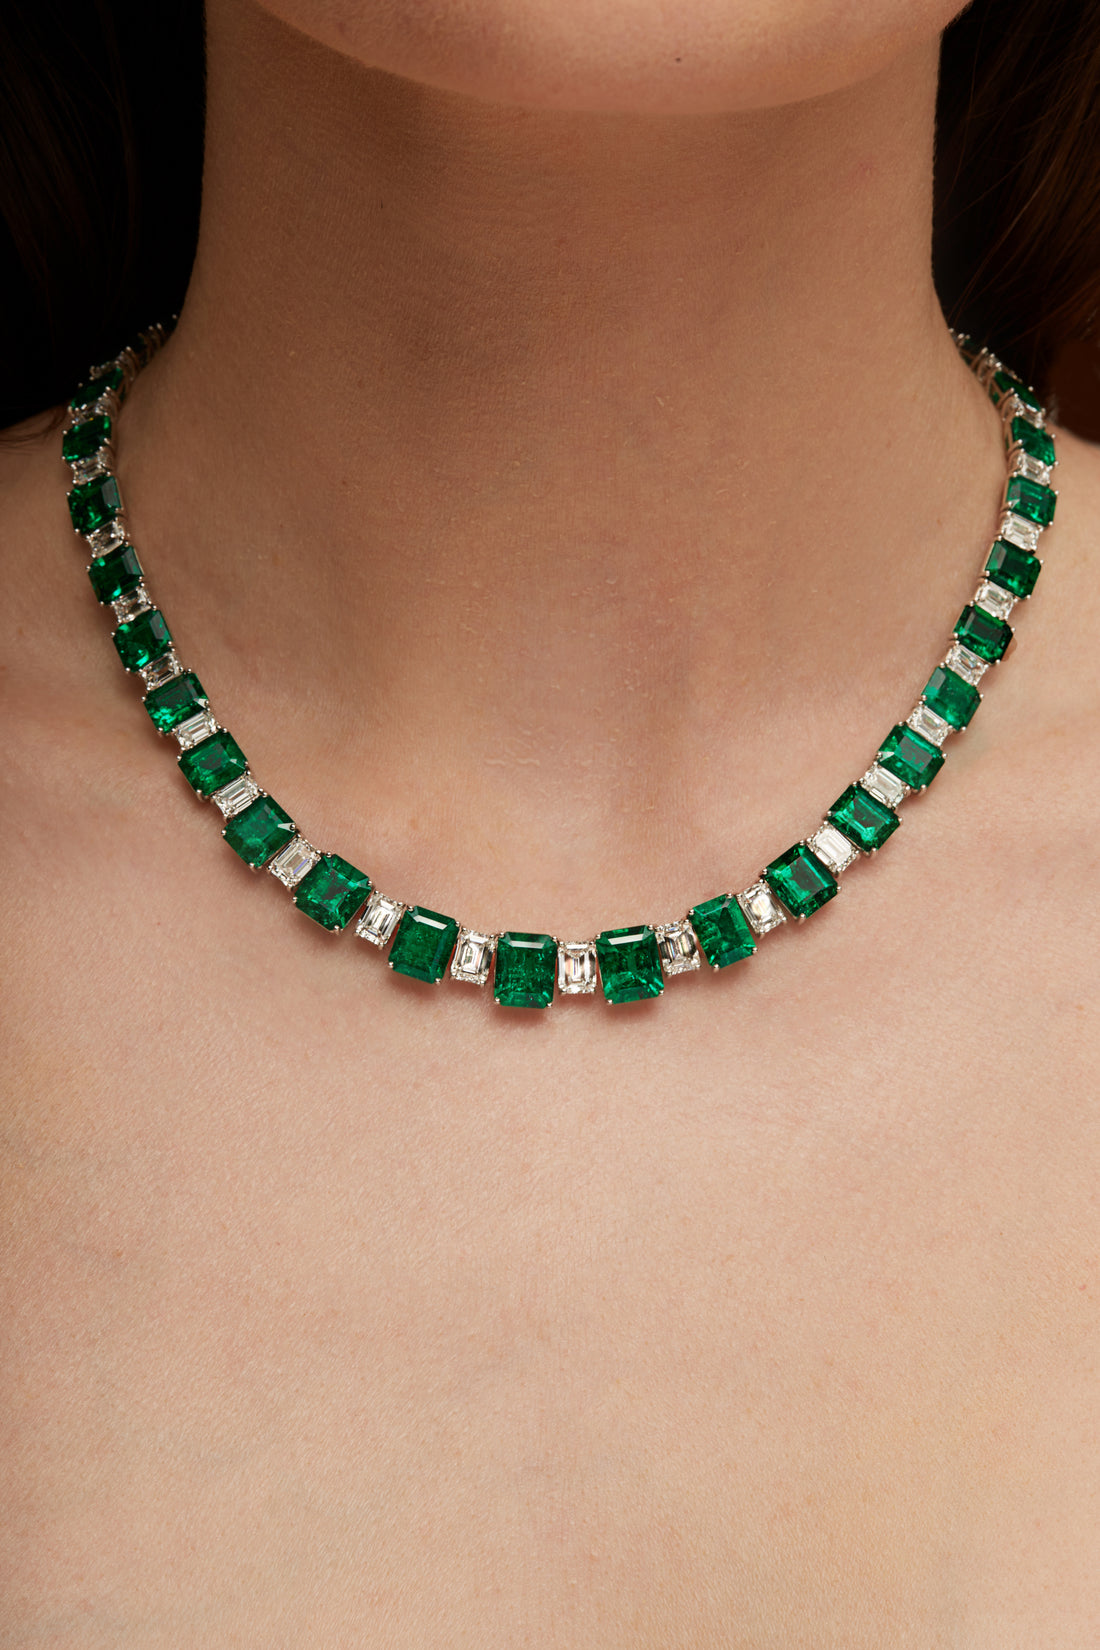 Emerald Cut Colombian Emerald and Diamond Necklace